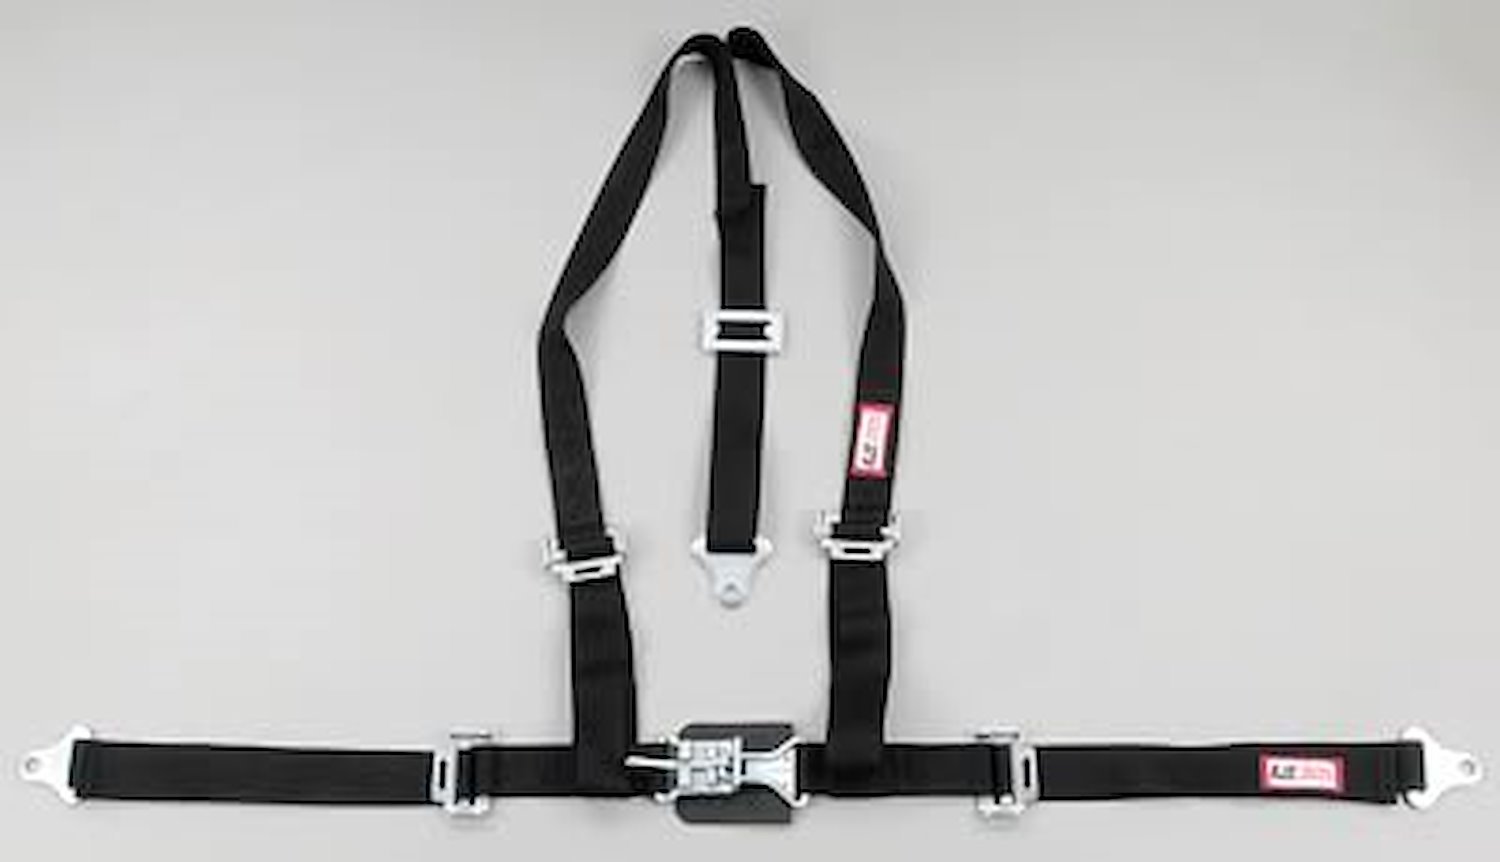 NON-SFI L&L HARNESS 3 PULL DOWN Lap BELT SNAP SEWN IN 2 S.H. Y FLOOR Mount w/STERNUM STRAP WRAP/BOLT RED